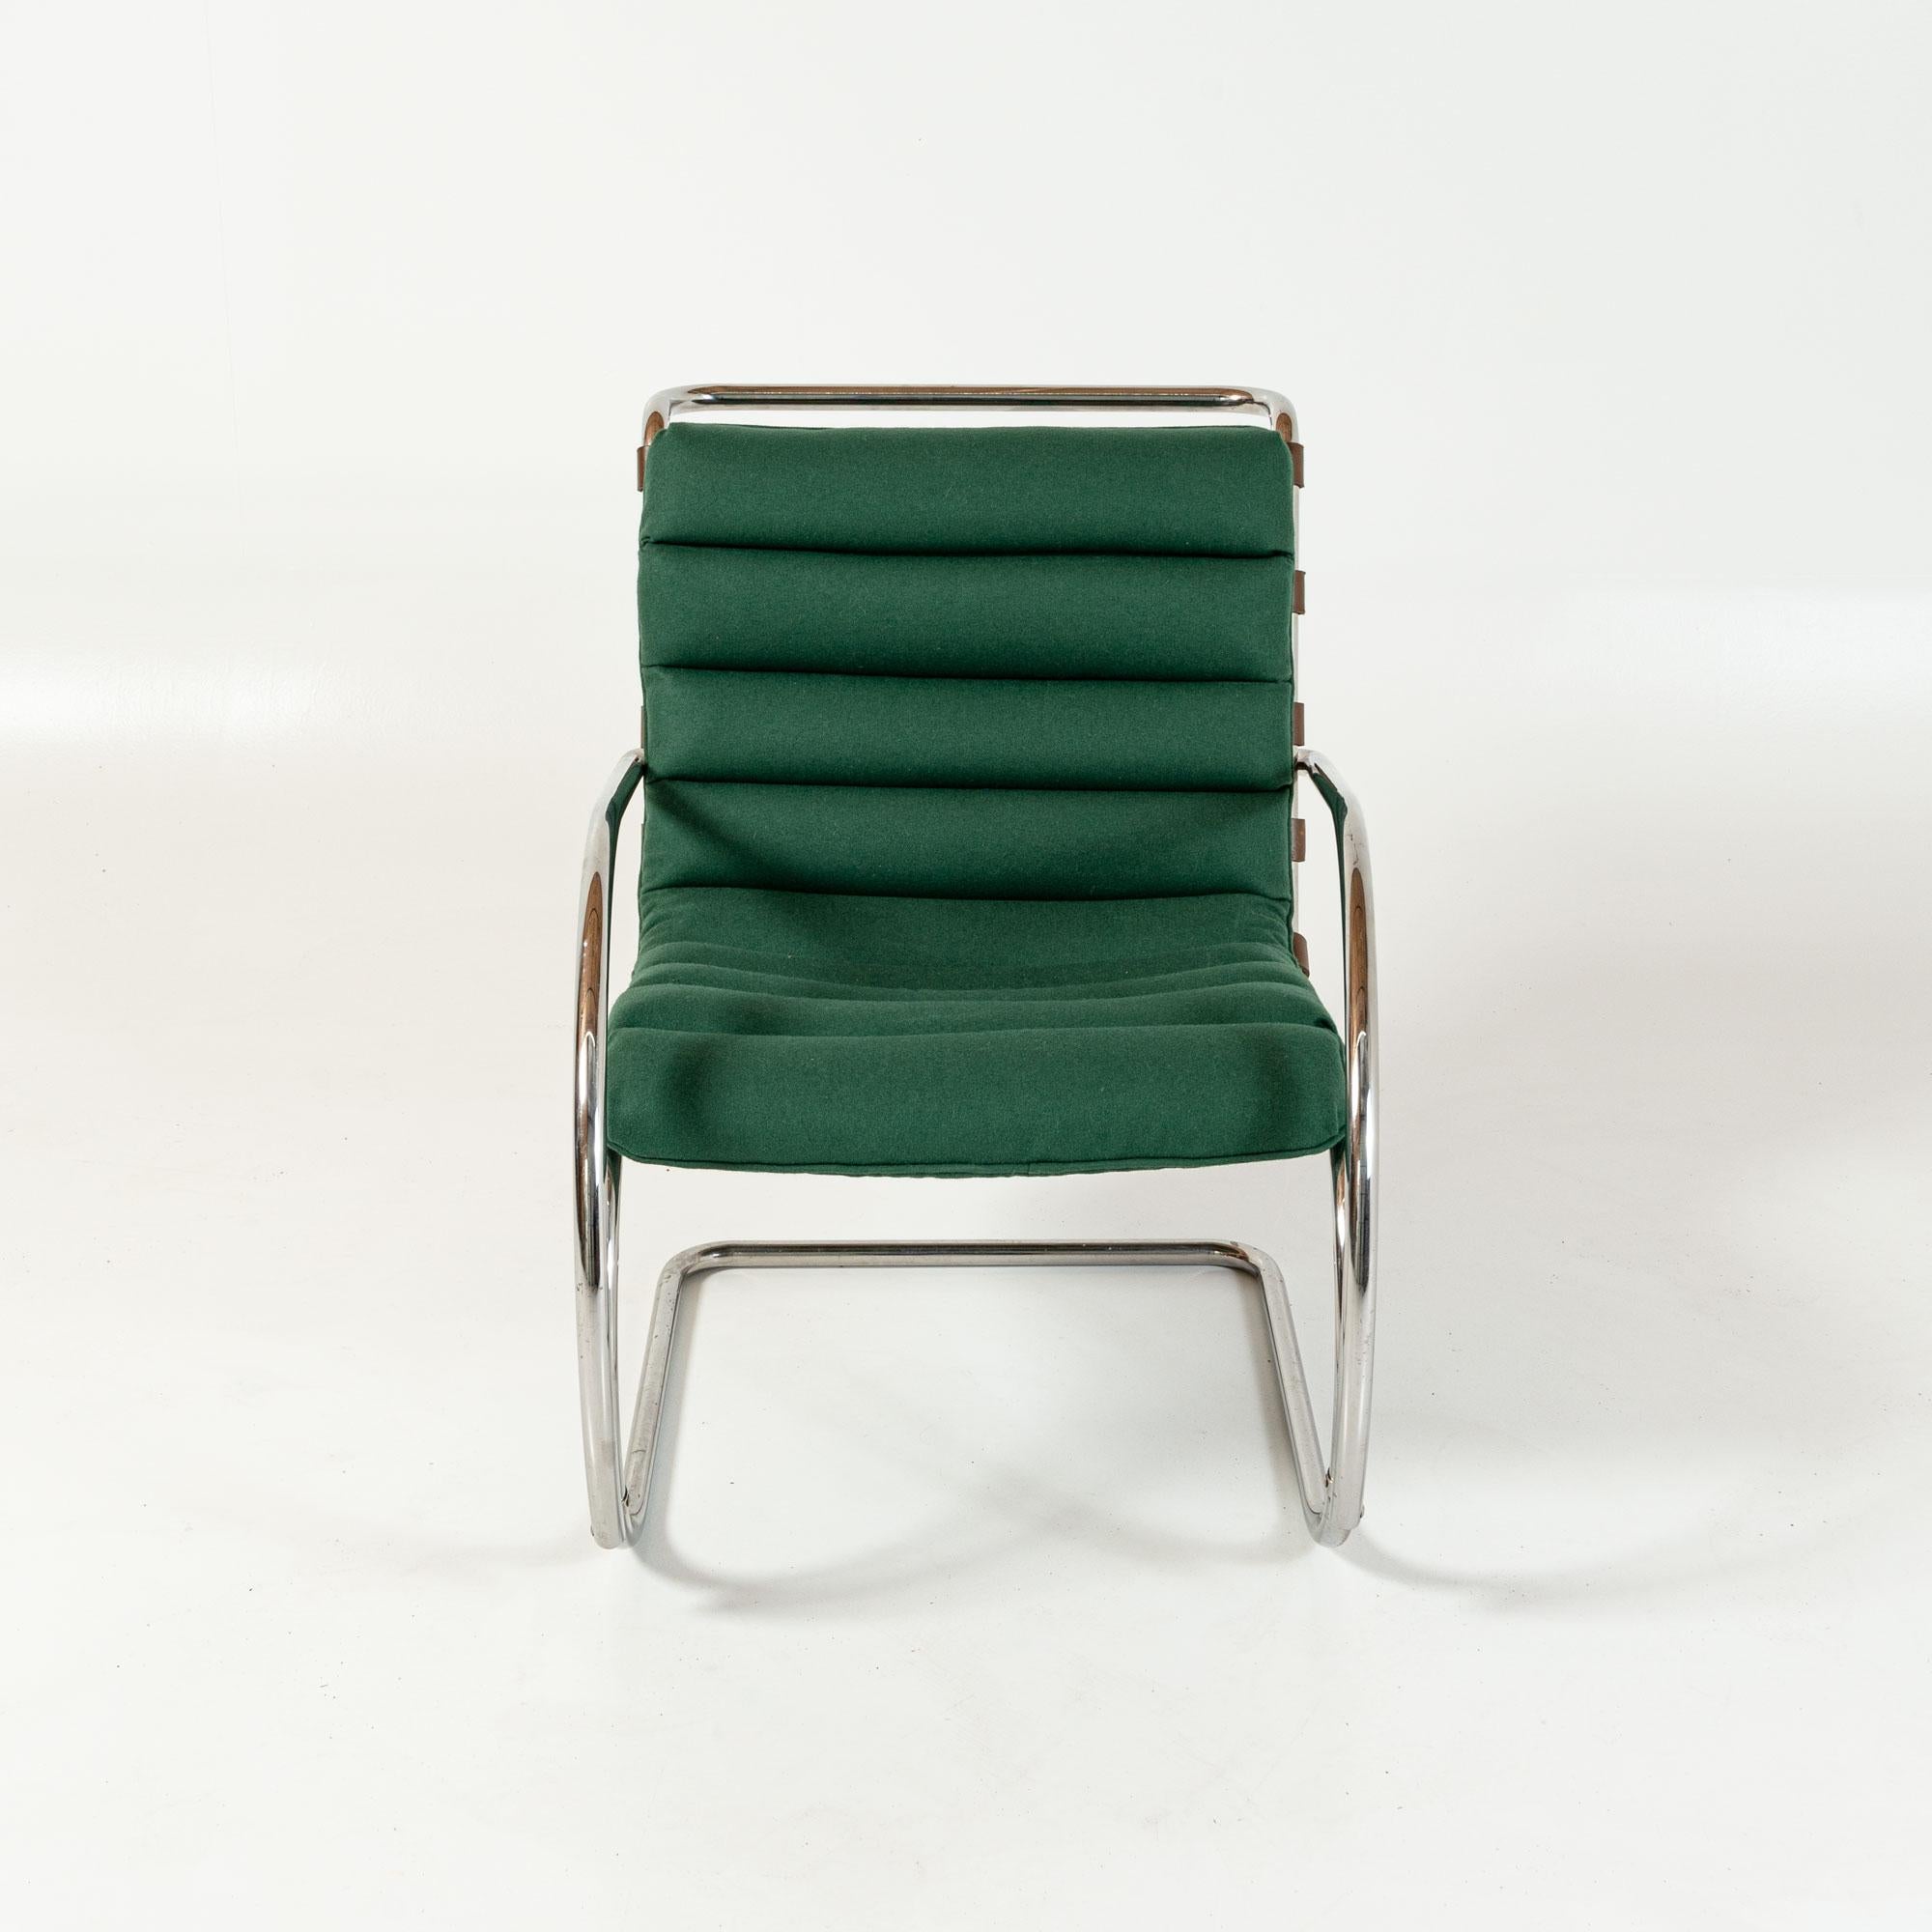 American Ludwig Mies van der Rohe for Knoll Mr Lounge Chair with Arms in Green Wool